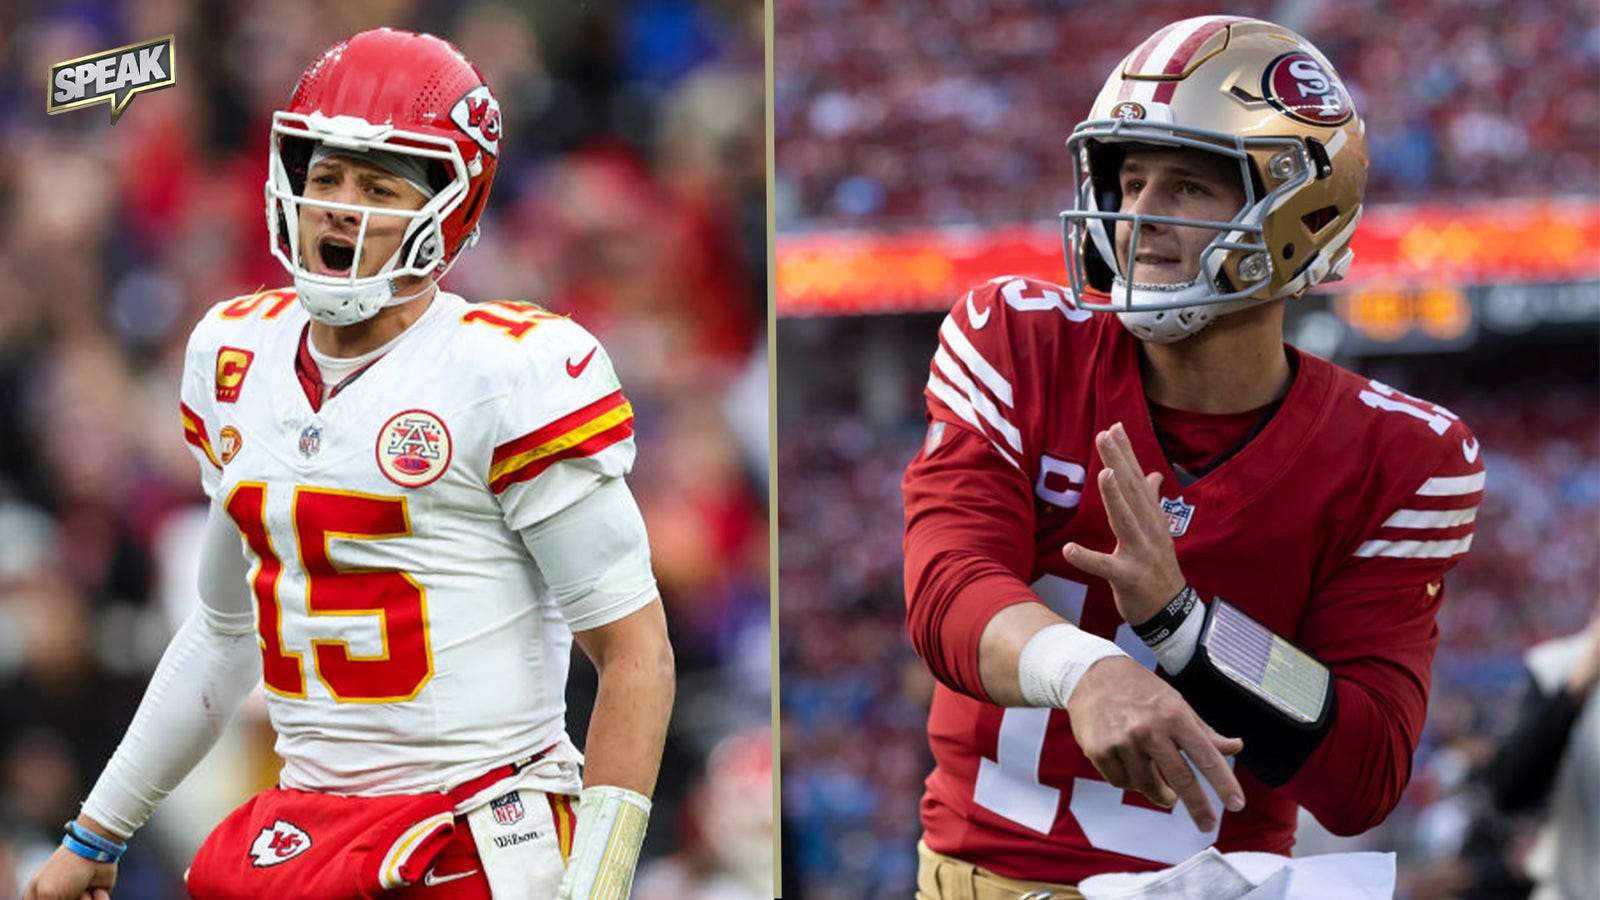 Was the 49ers or Chiefs more impressive in the Super Bowl?